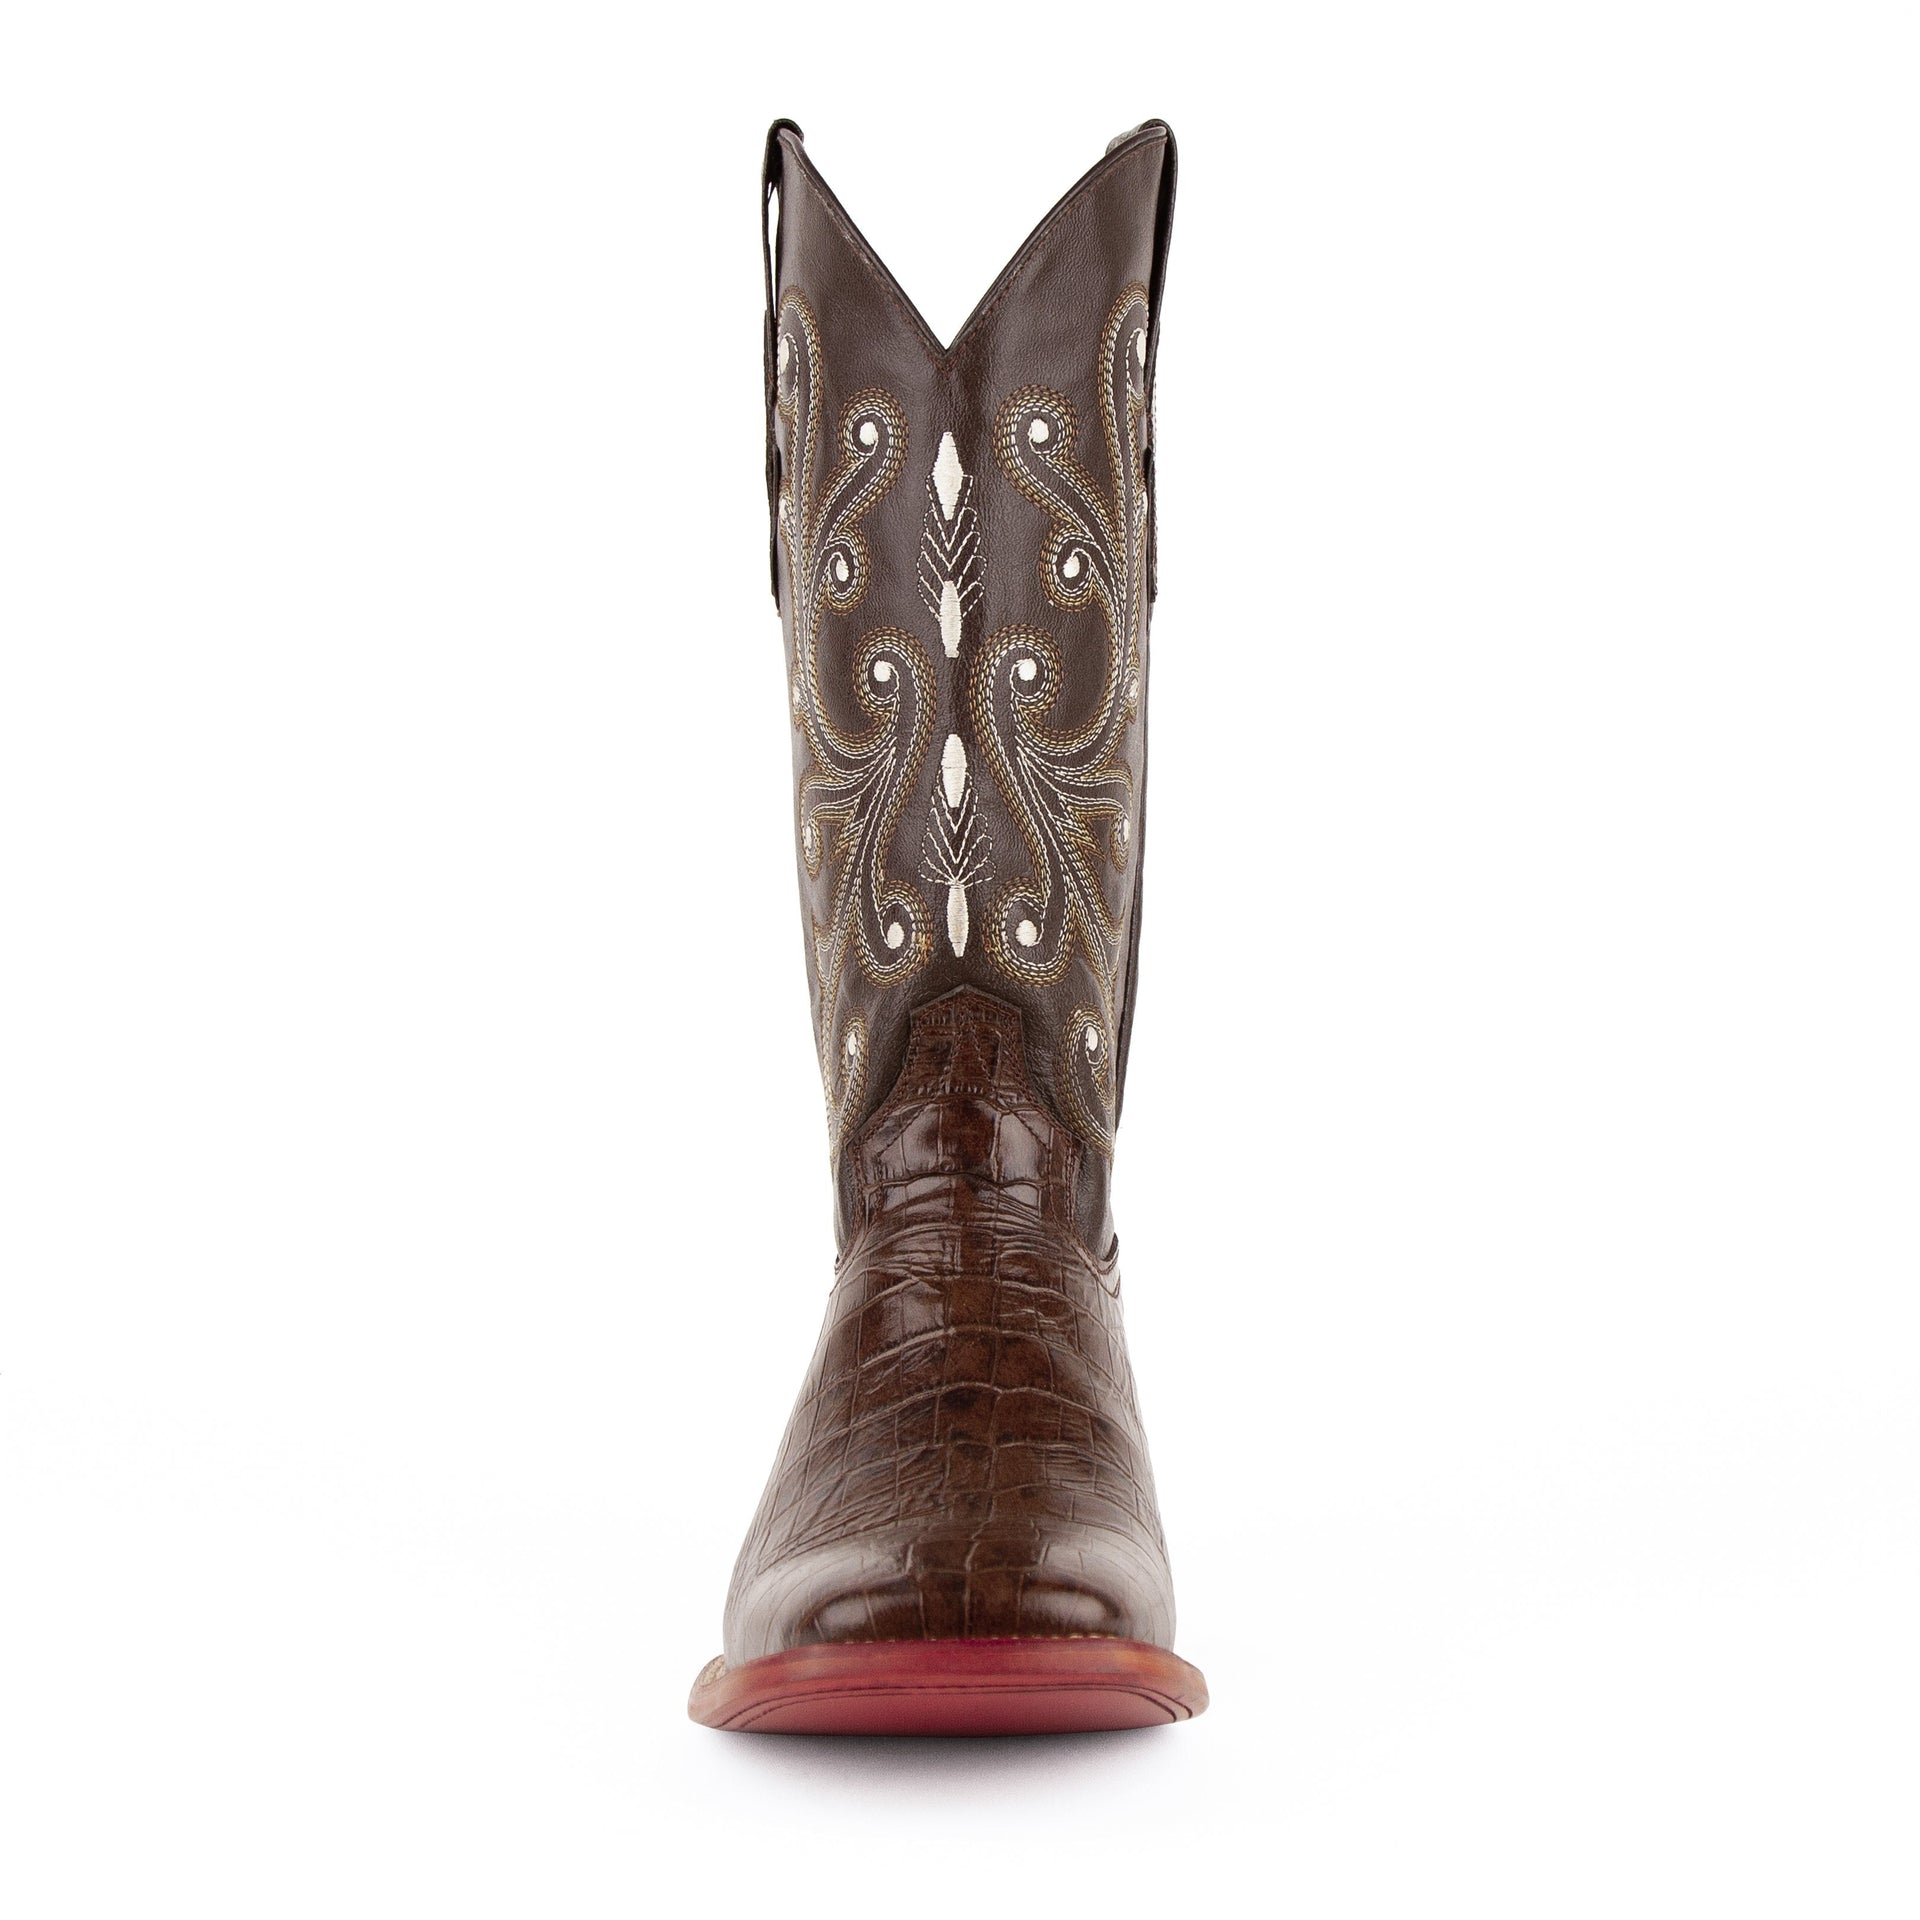 Men's Ferrini Mustang Alligator Belly Print Boots Handcrafted Chocolate - yeehawcowboy